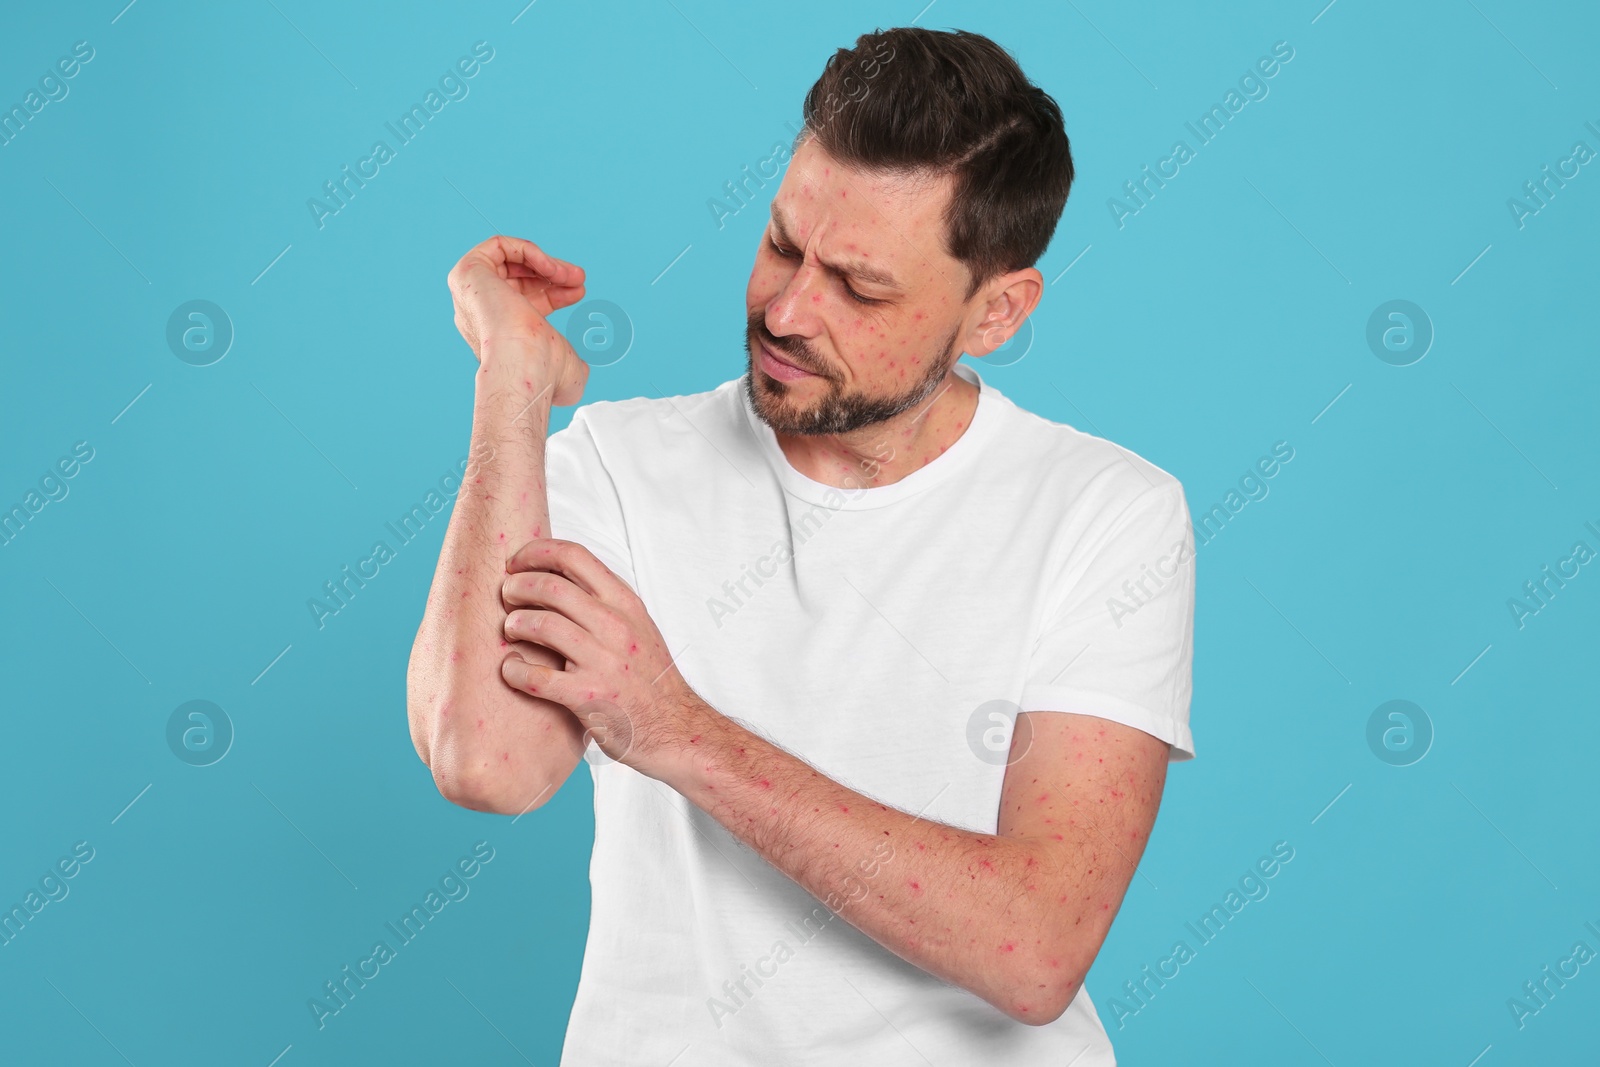 Photo of Man with rash suffering from monkeypox virus on light blue background